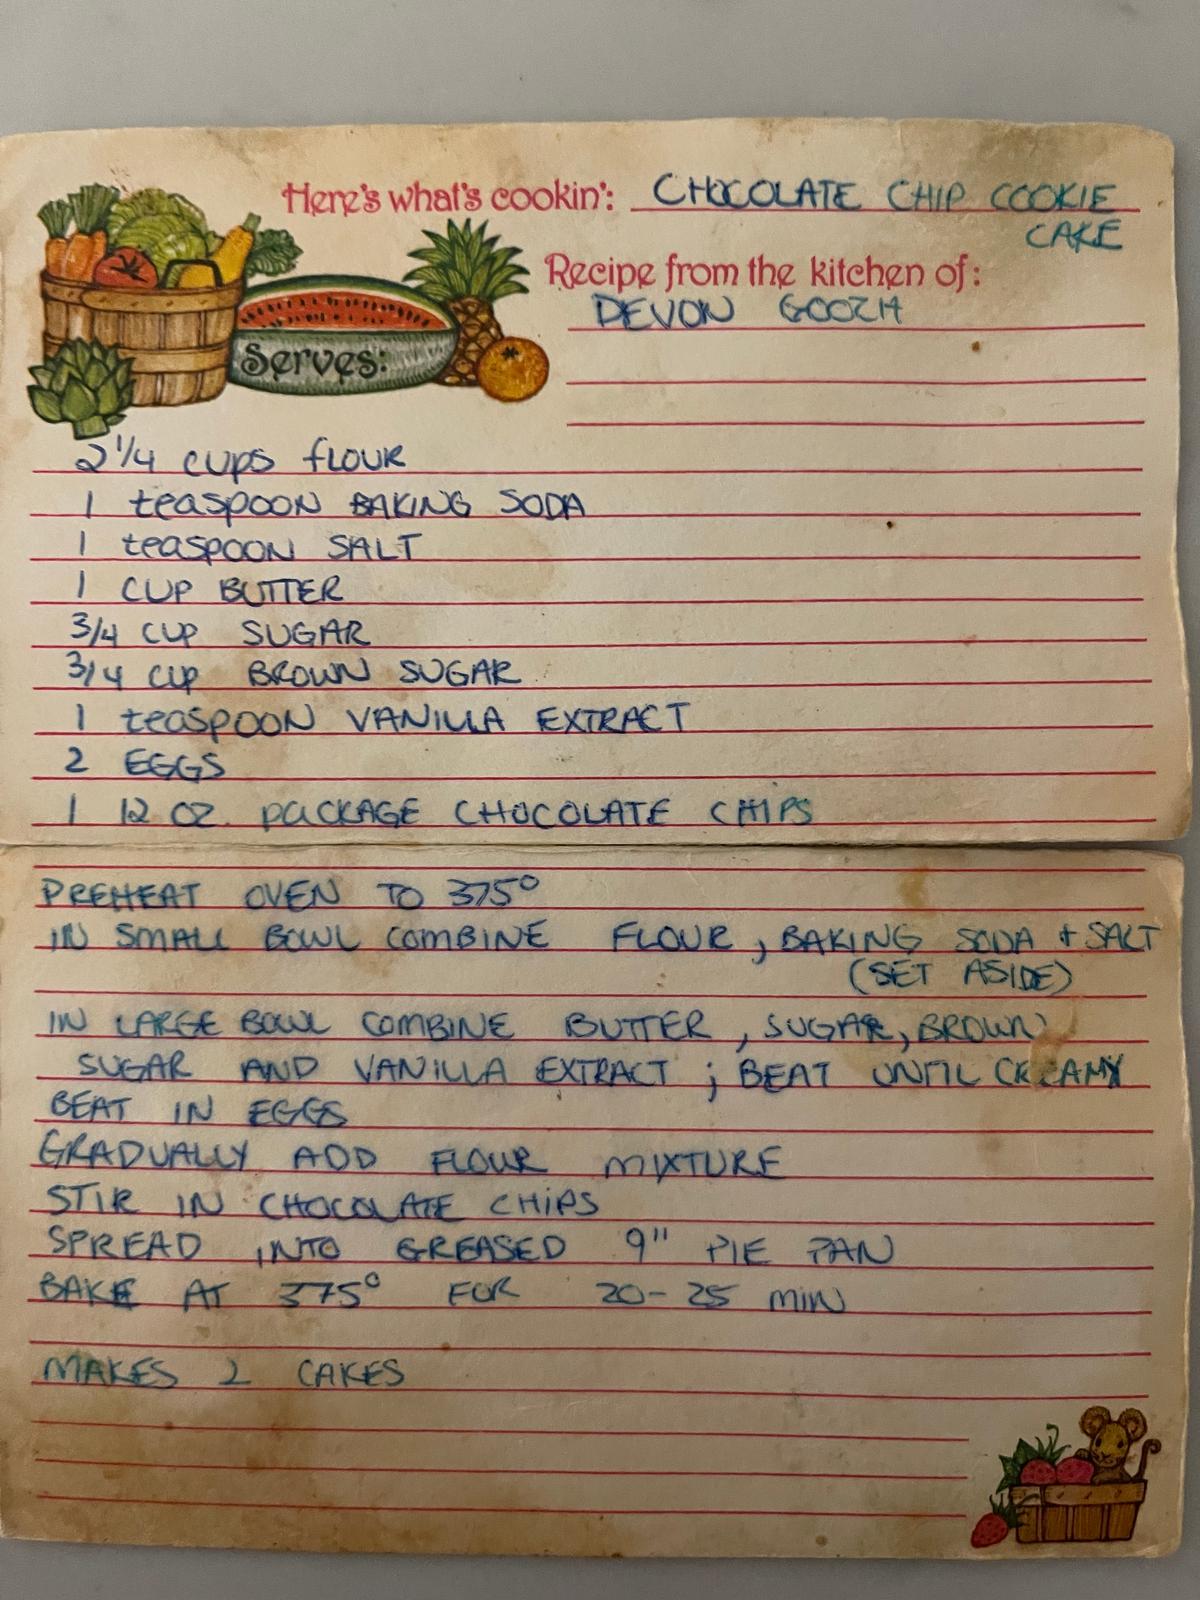 The original recipe card given to the author by her student, Devon. (Courtesy of Maria C. Garriga)